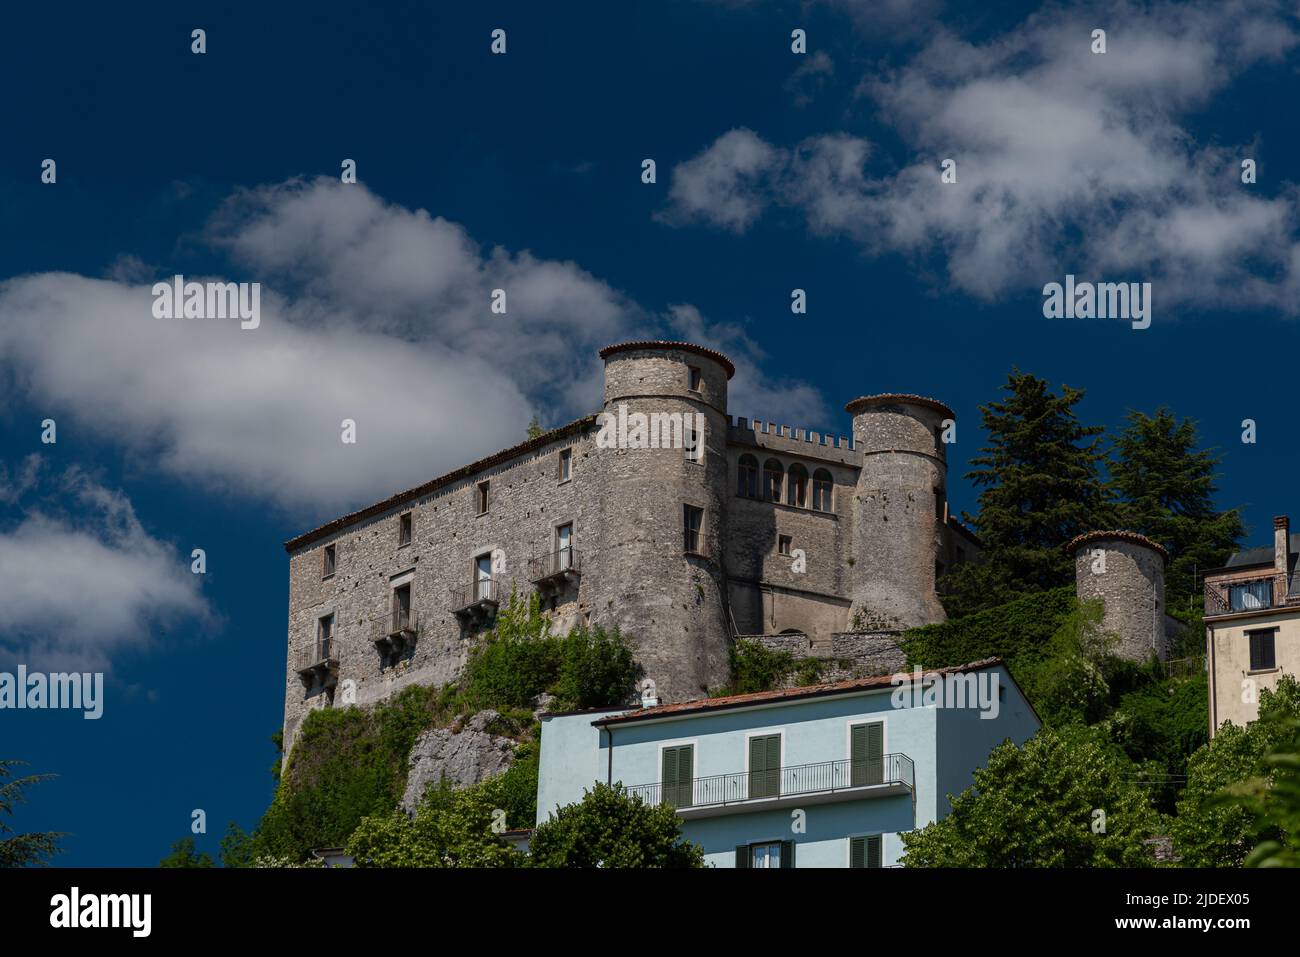 The castle was built in the 11th century, in the shape of an irregular pentagon, bordered by 5 towers, above the ravine overlooking the Carpino river. Stock Photo